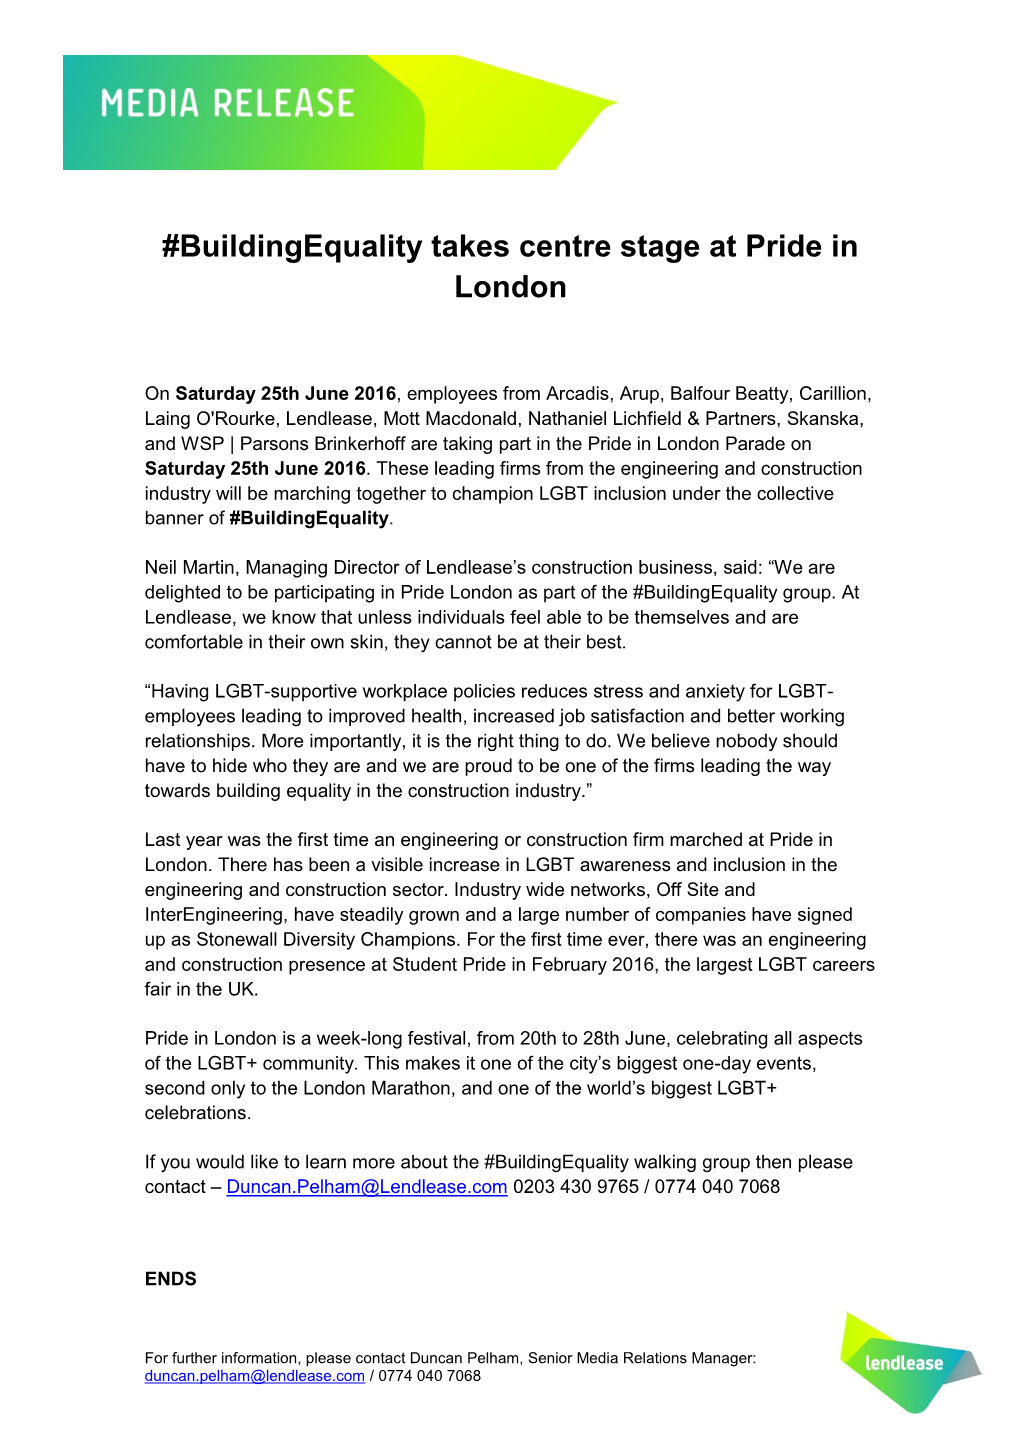 Buildingequality Takes Centre Stage at Pride in London